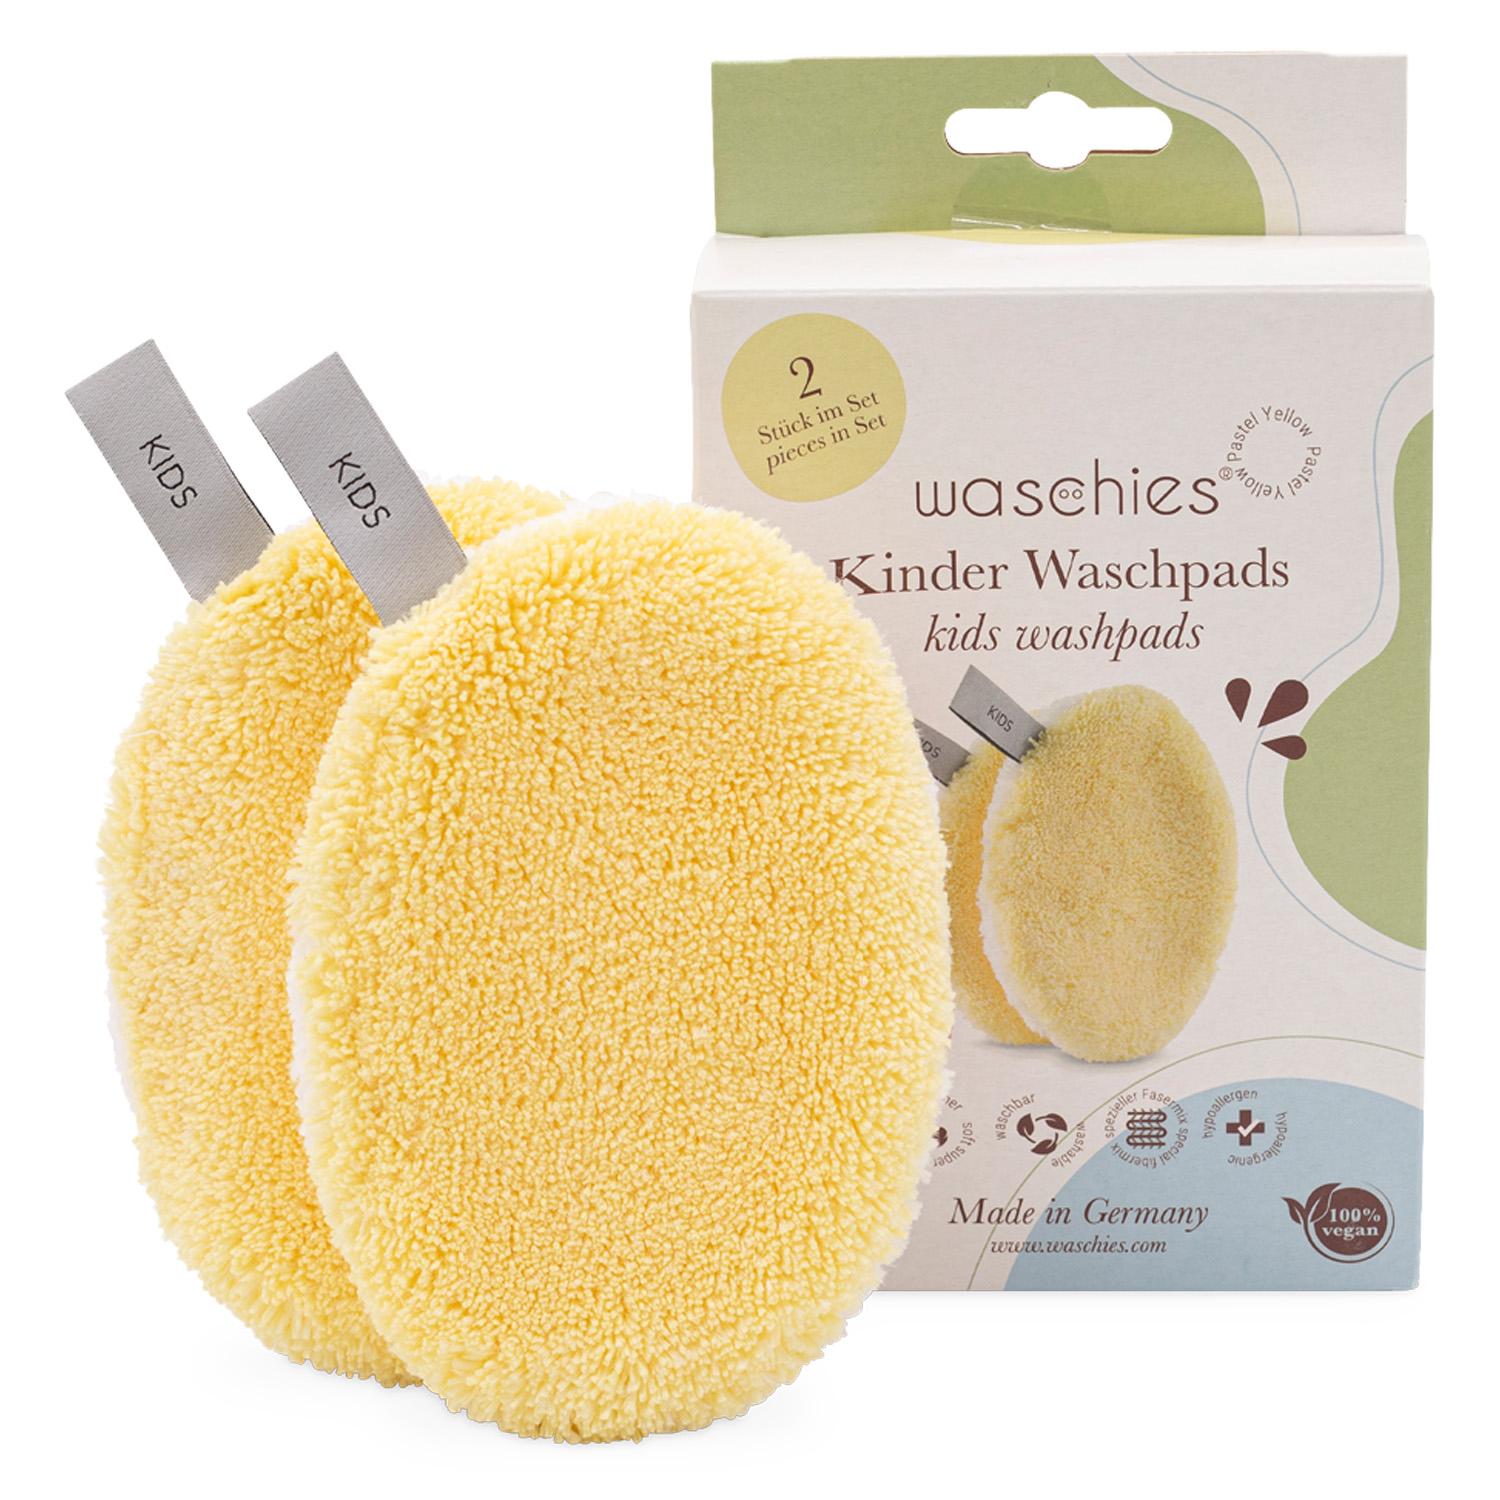 Waschies Kidsline - wash pads for babies and kids pastel yellow